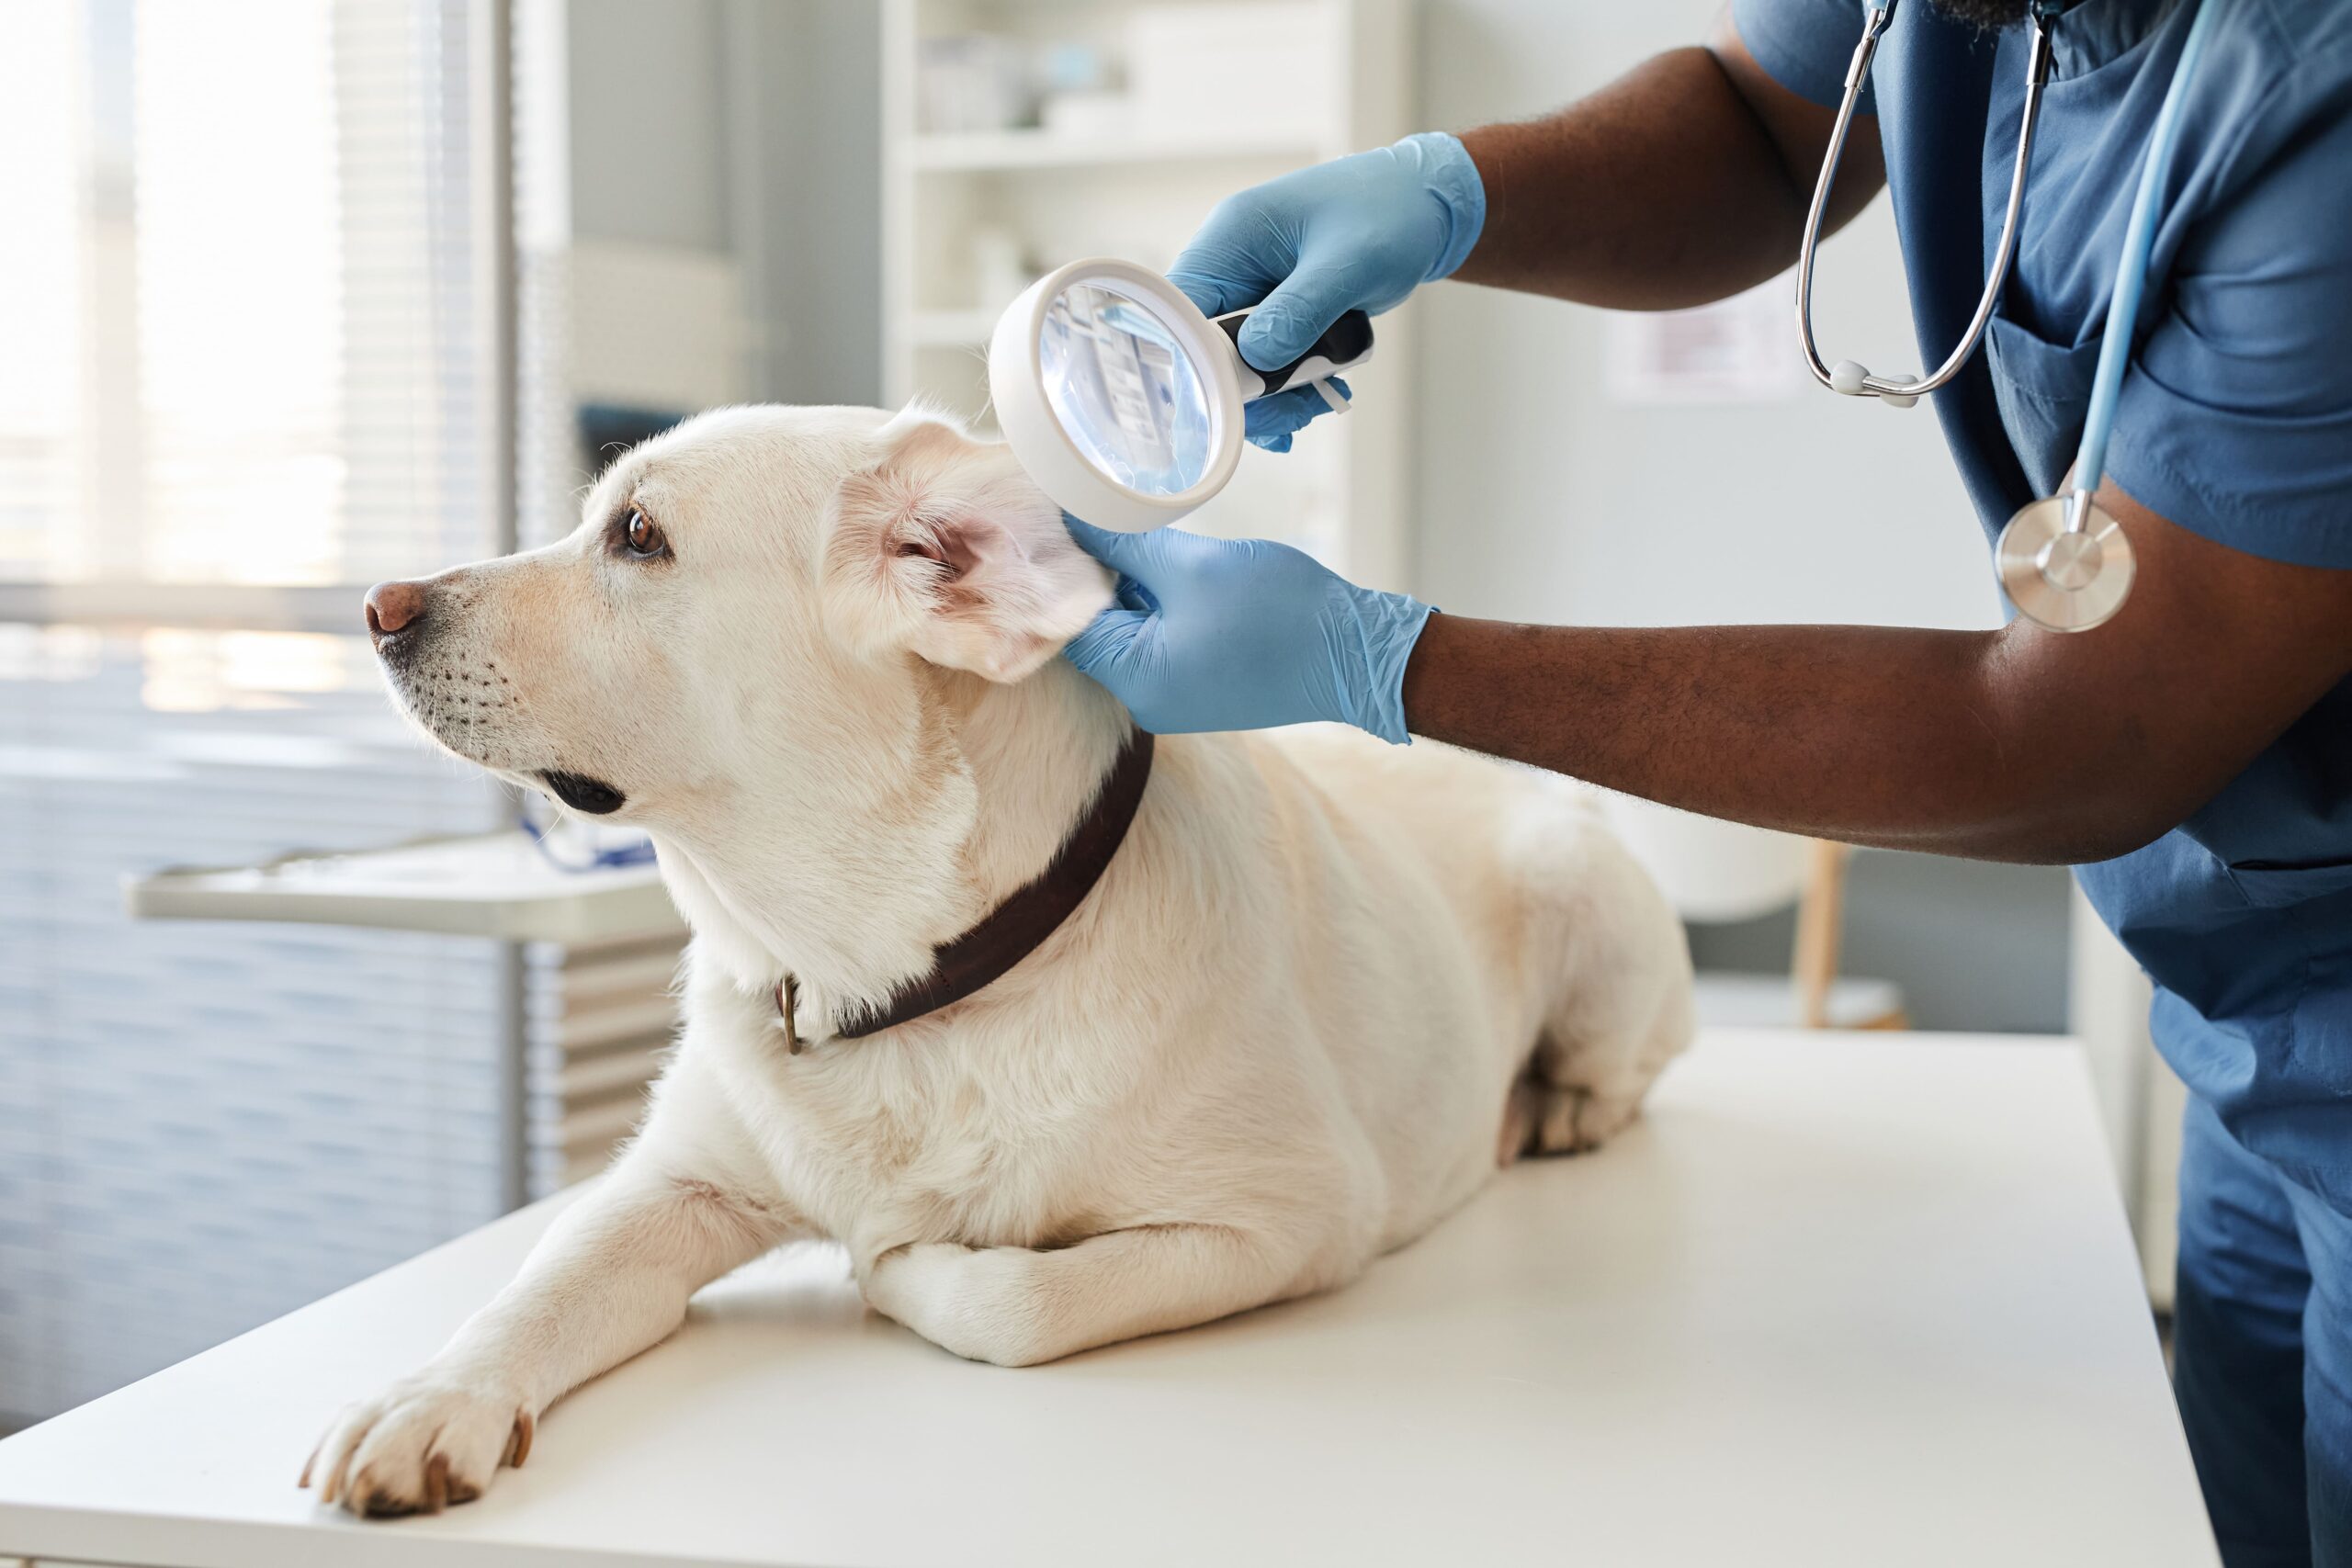 How to treat dog ear infection without vet